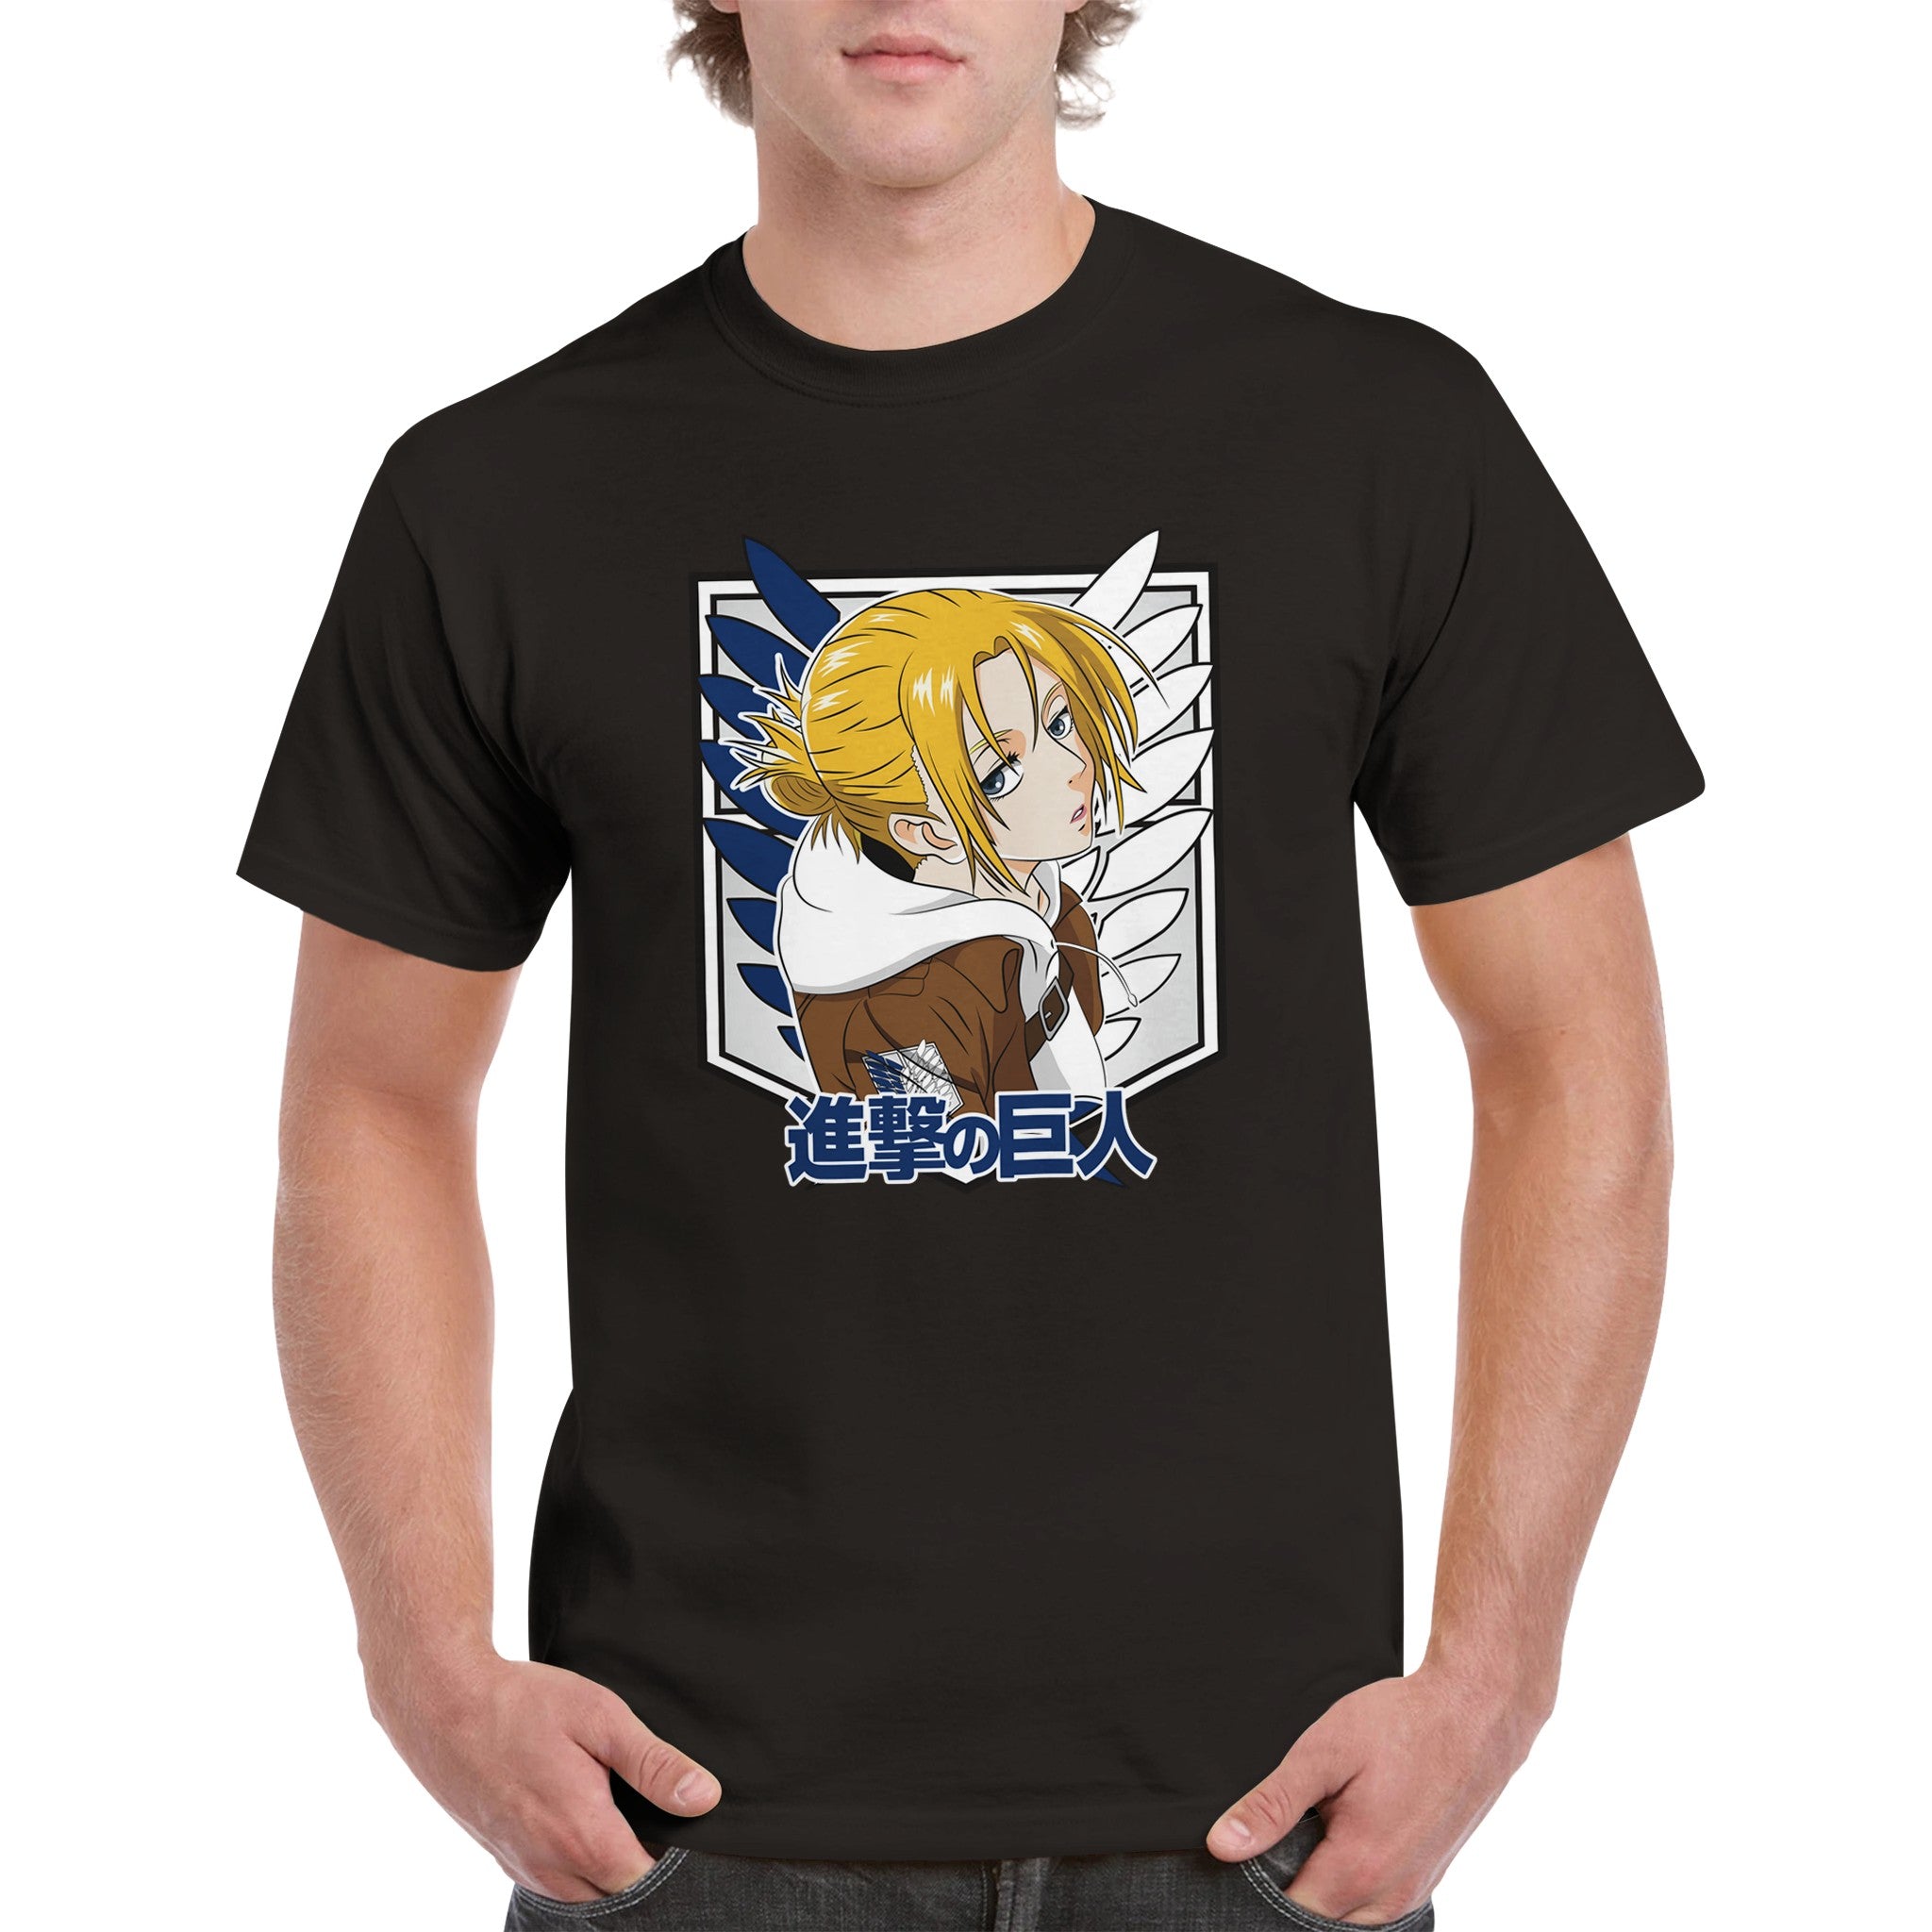 shop and buy attack on titan anime clothing annie t-shirt